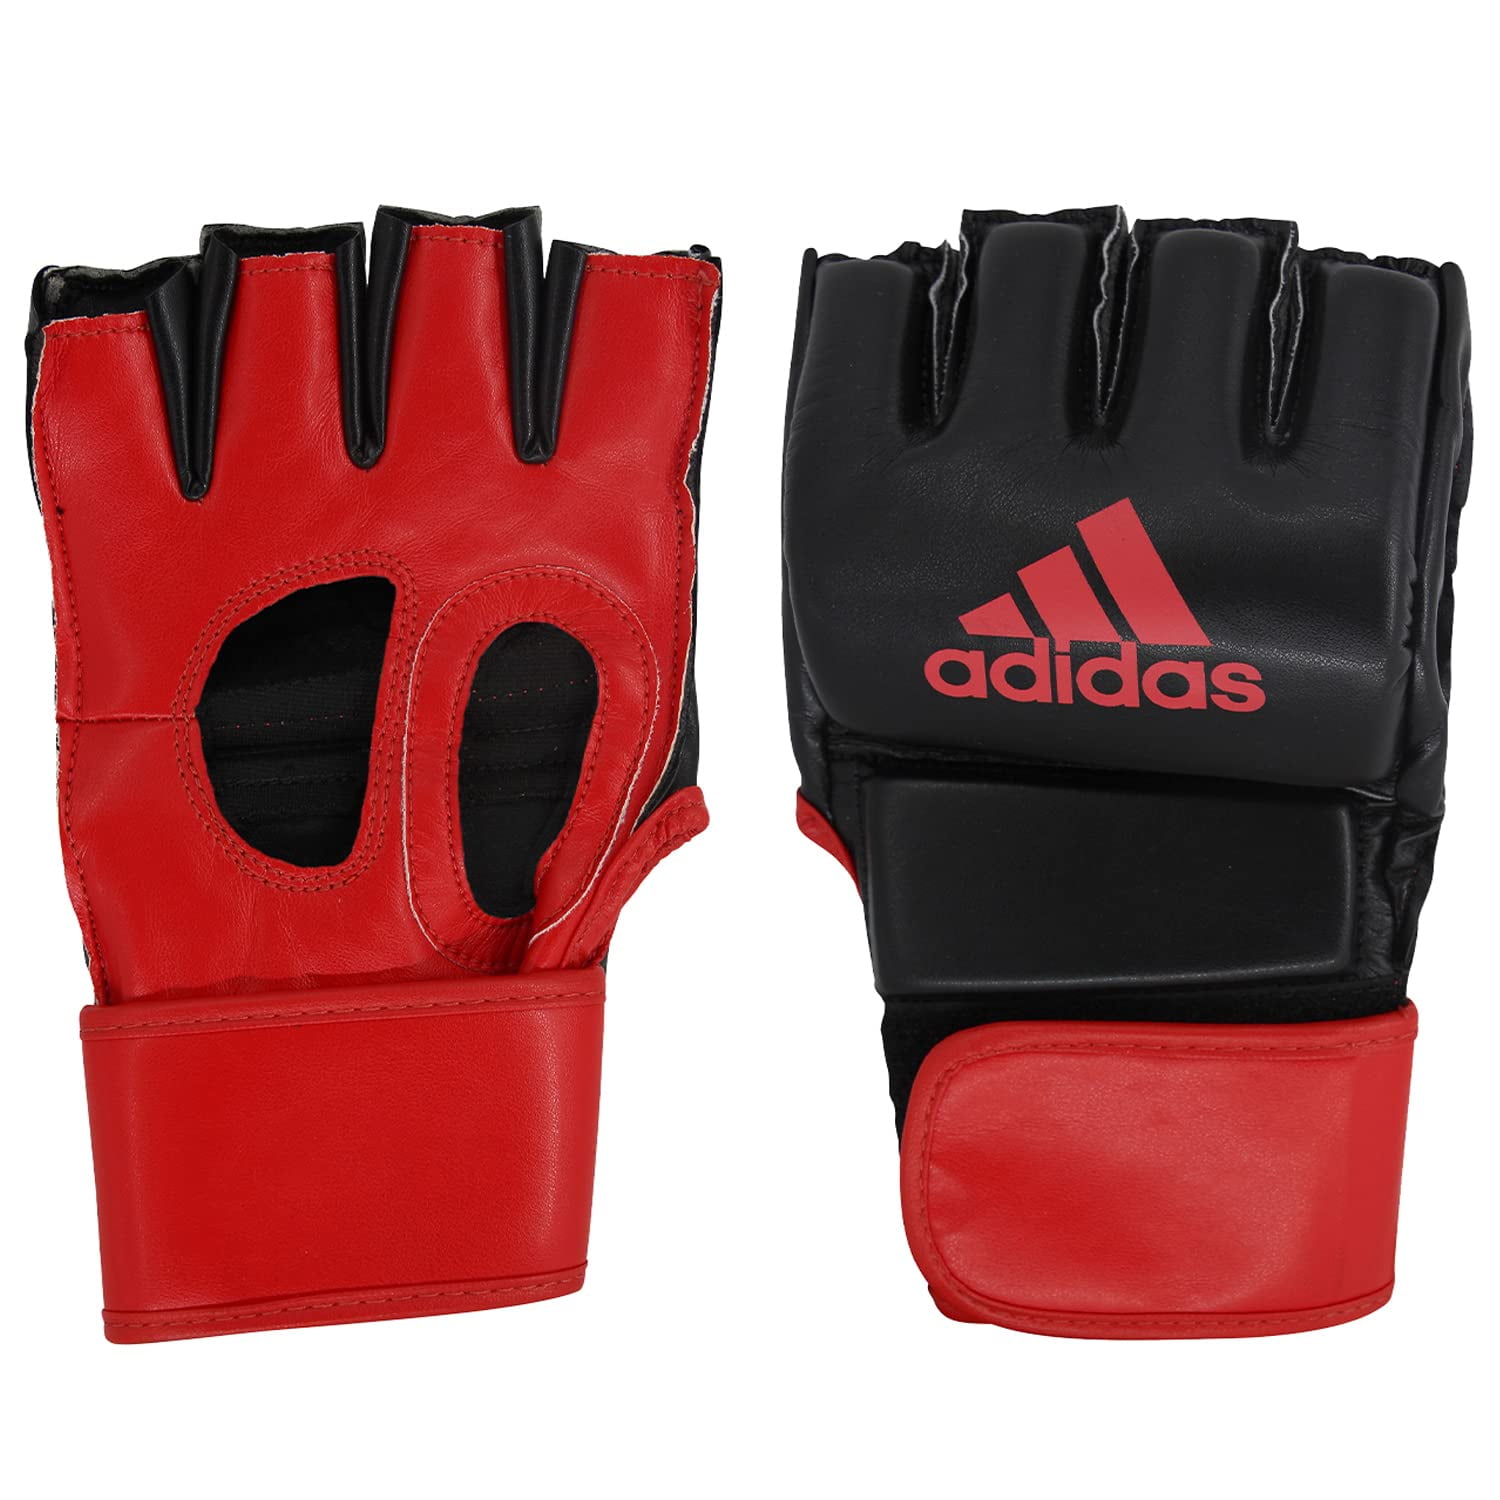 Adidas MMA Gloves Grappling Gloves, for Men & Women, Black/Chromium Red,  Small, Weight 4 oz.